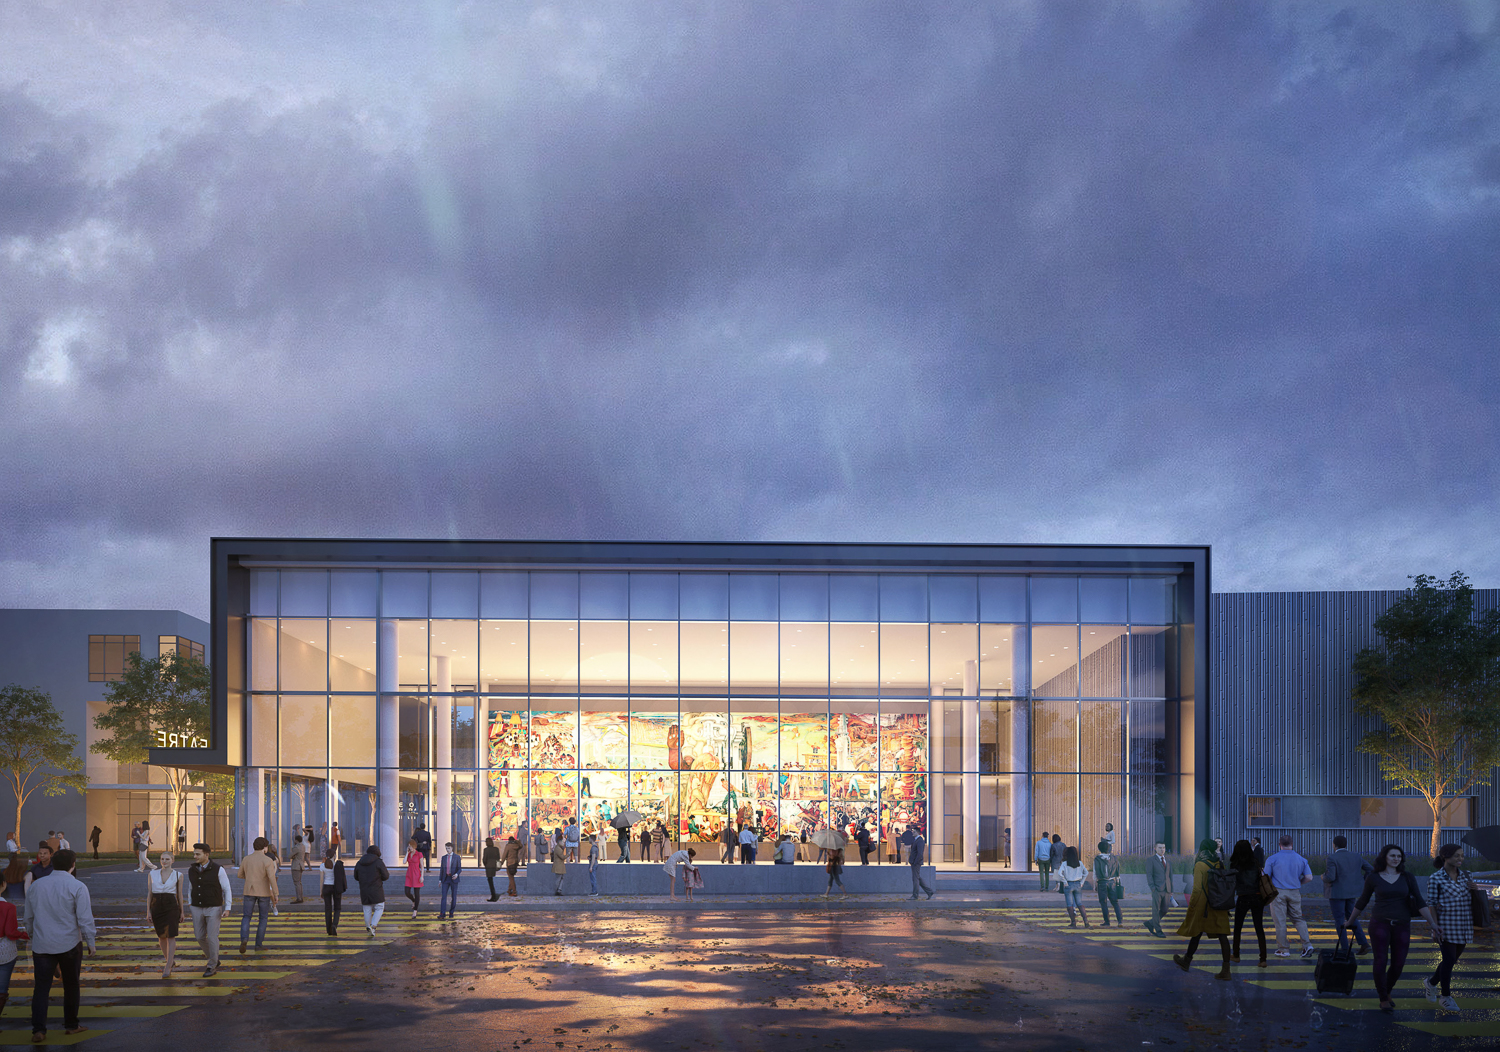 Diego Rivera Theater frontal view of the Pan American Unity Mural in the evening, rendering by LMN Architects